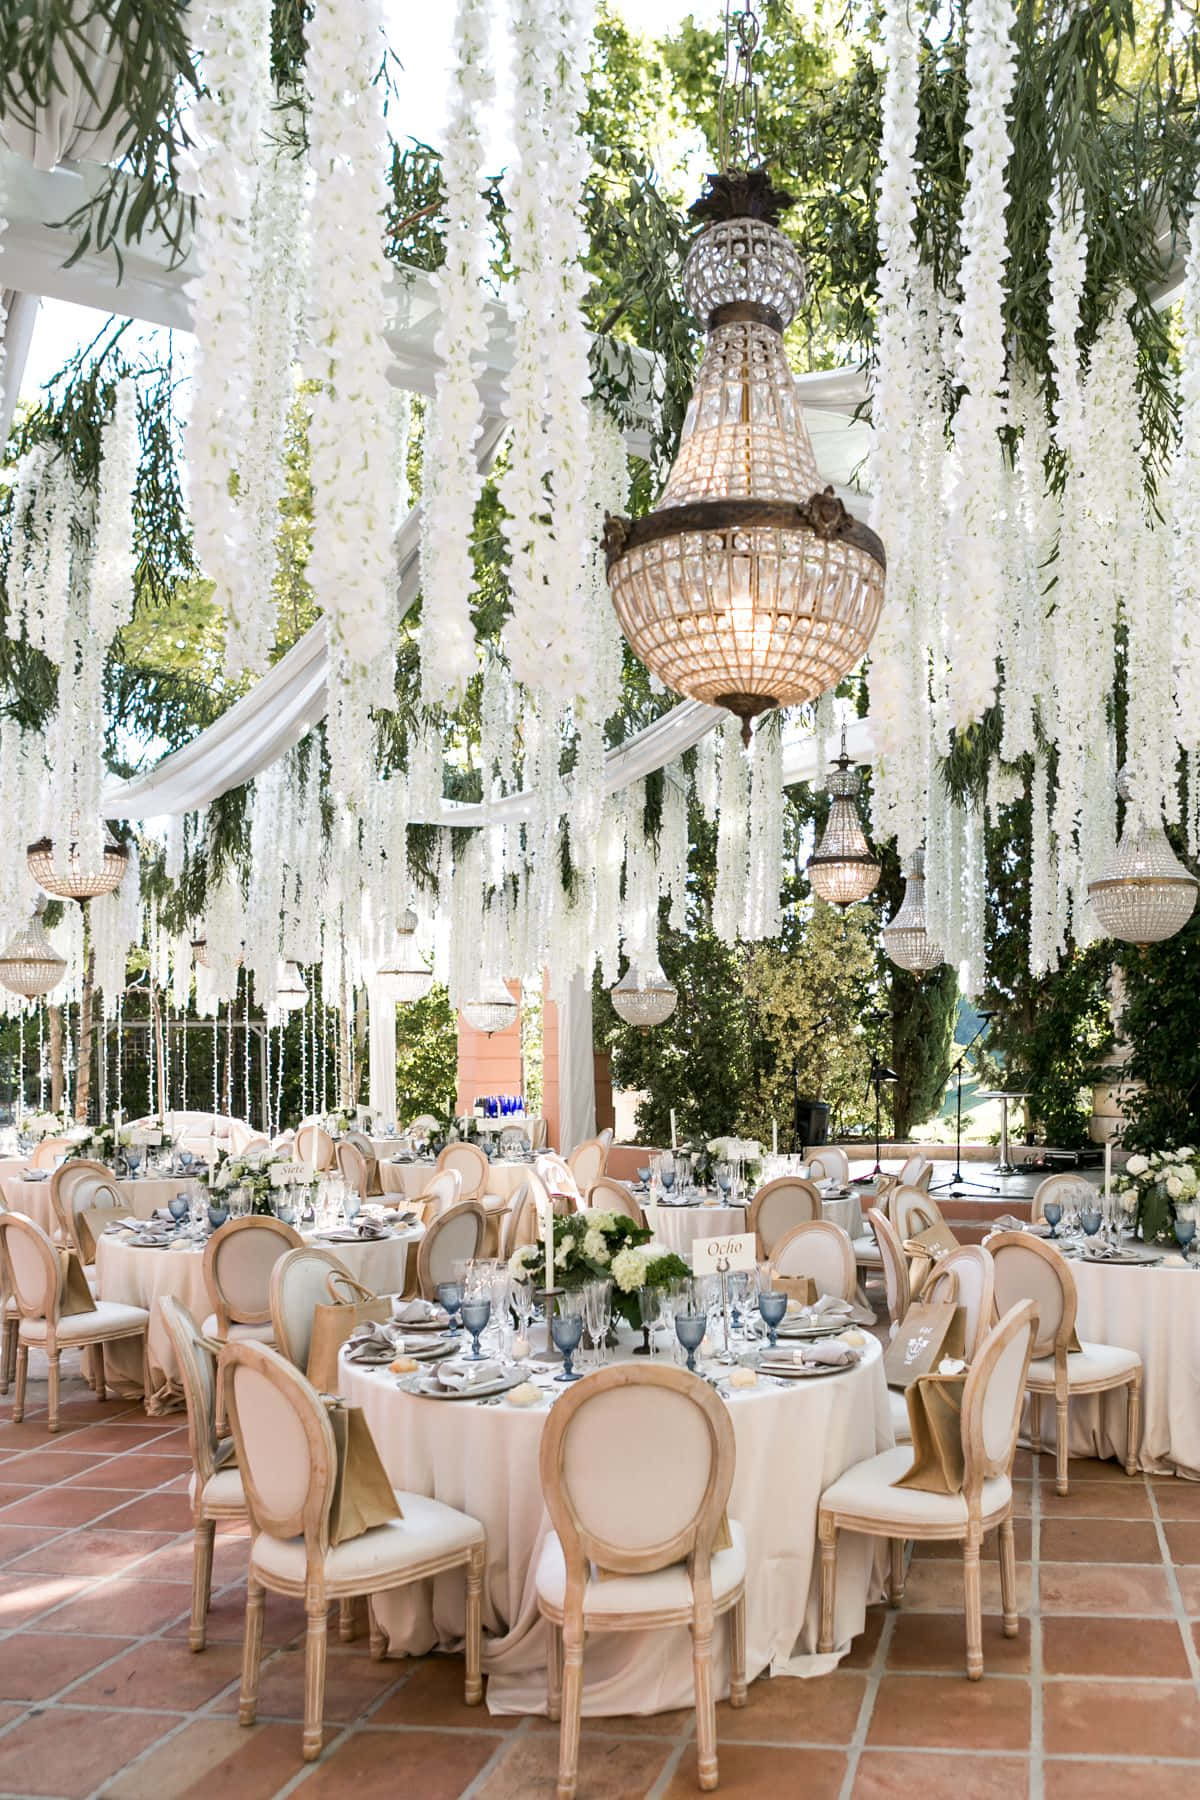 A Wedding Reception With White Tables And Chairs